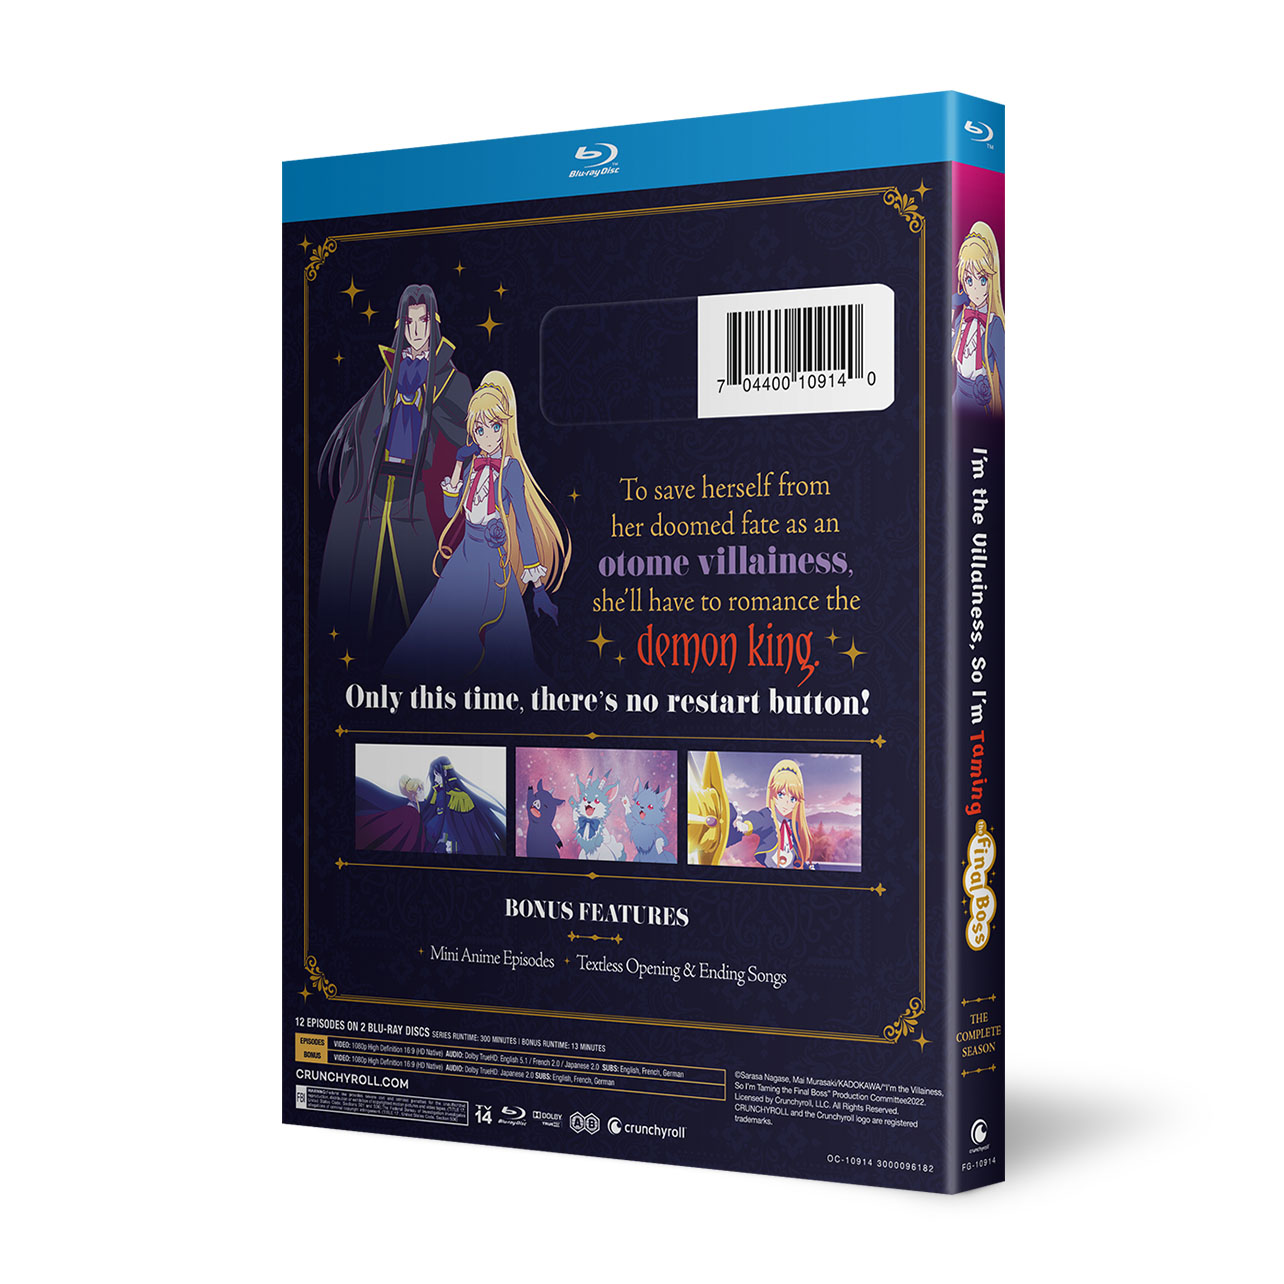 I'm the Villainess, So I'm Taming the Final Boss - The Complete Season - Blu-ray image count 5